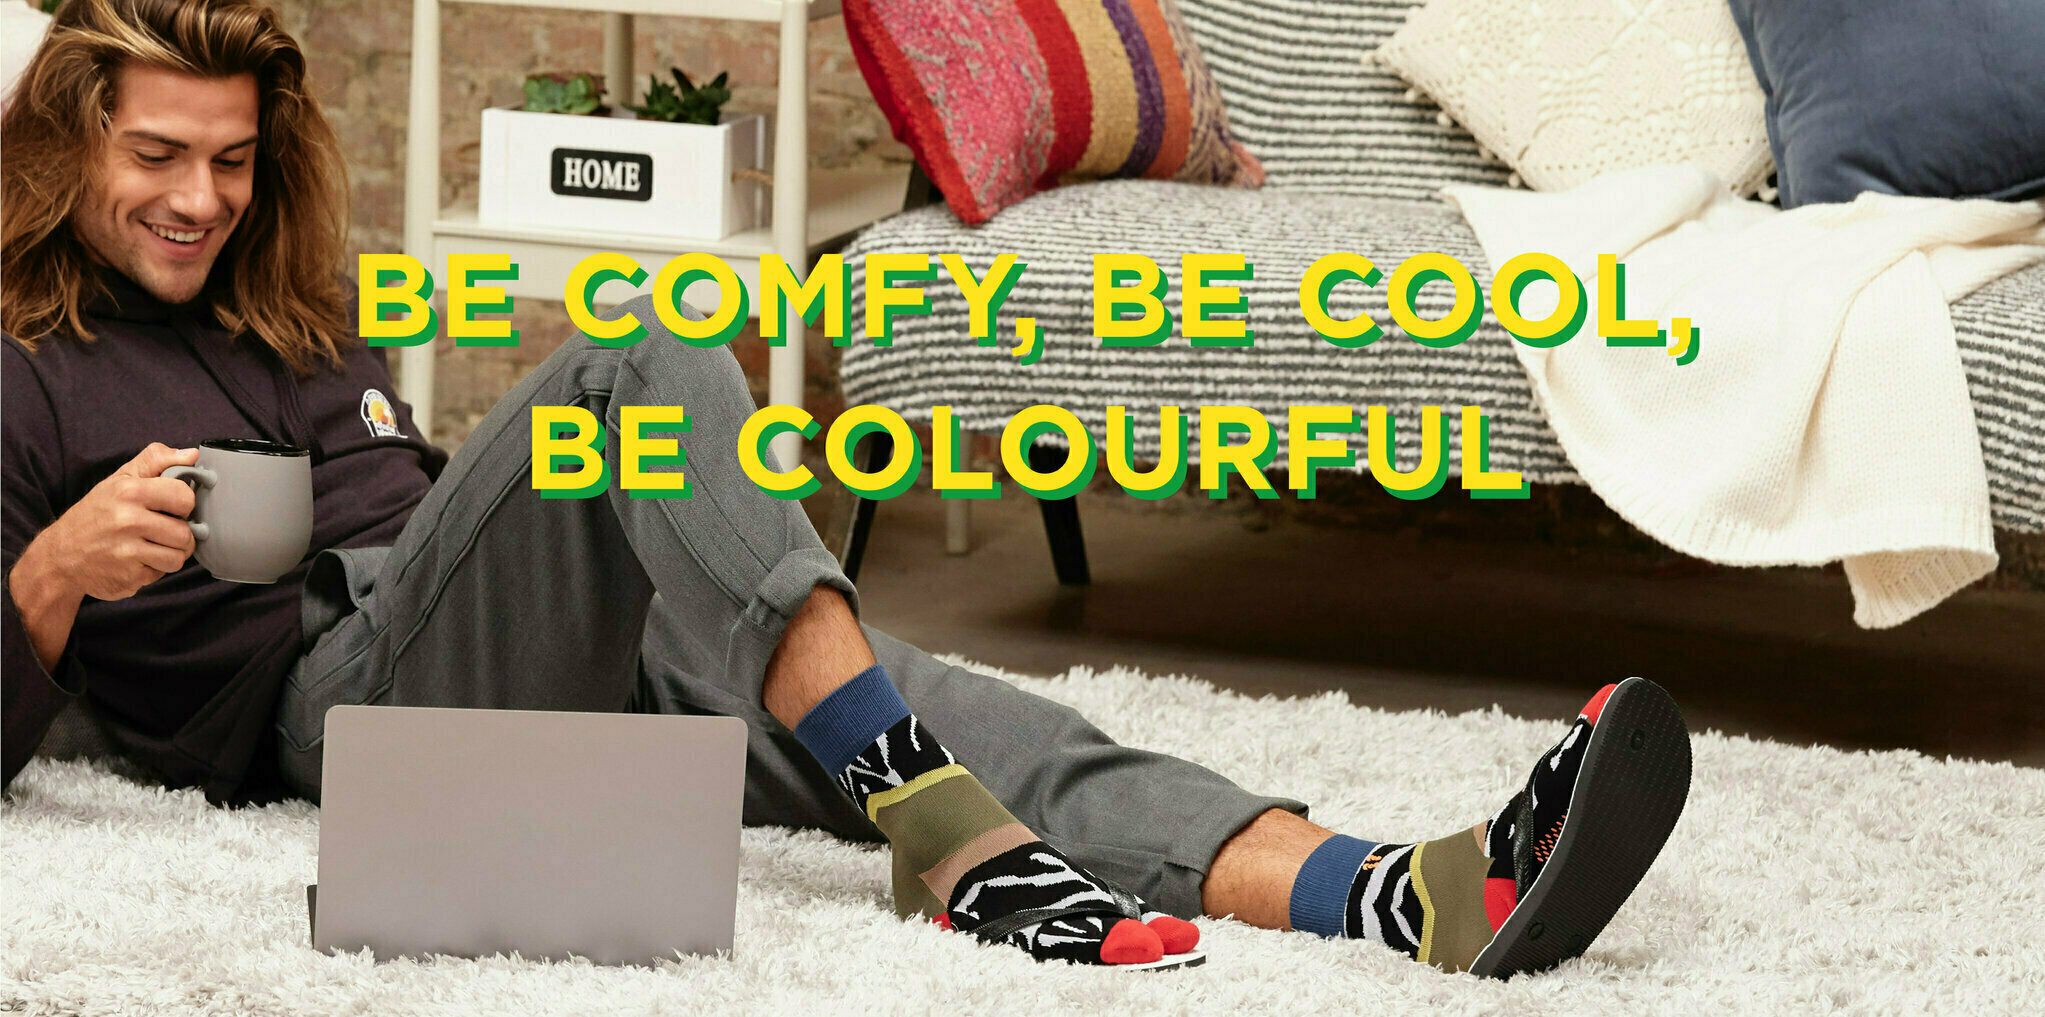 Be comfy, be cool,

be colourful